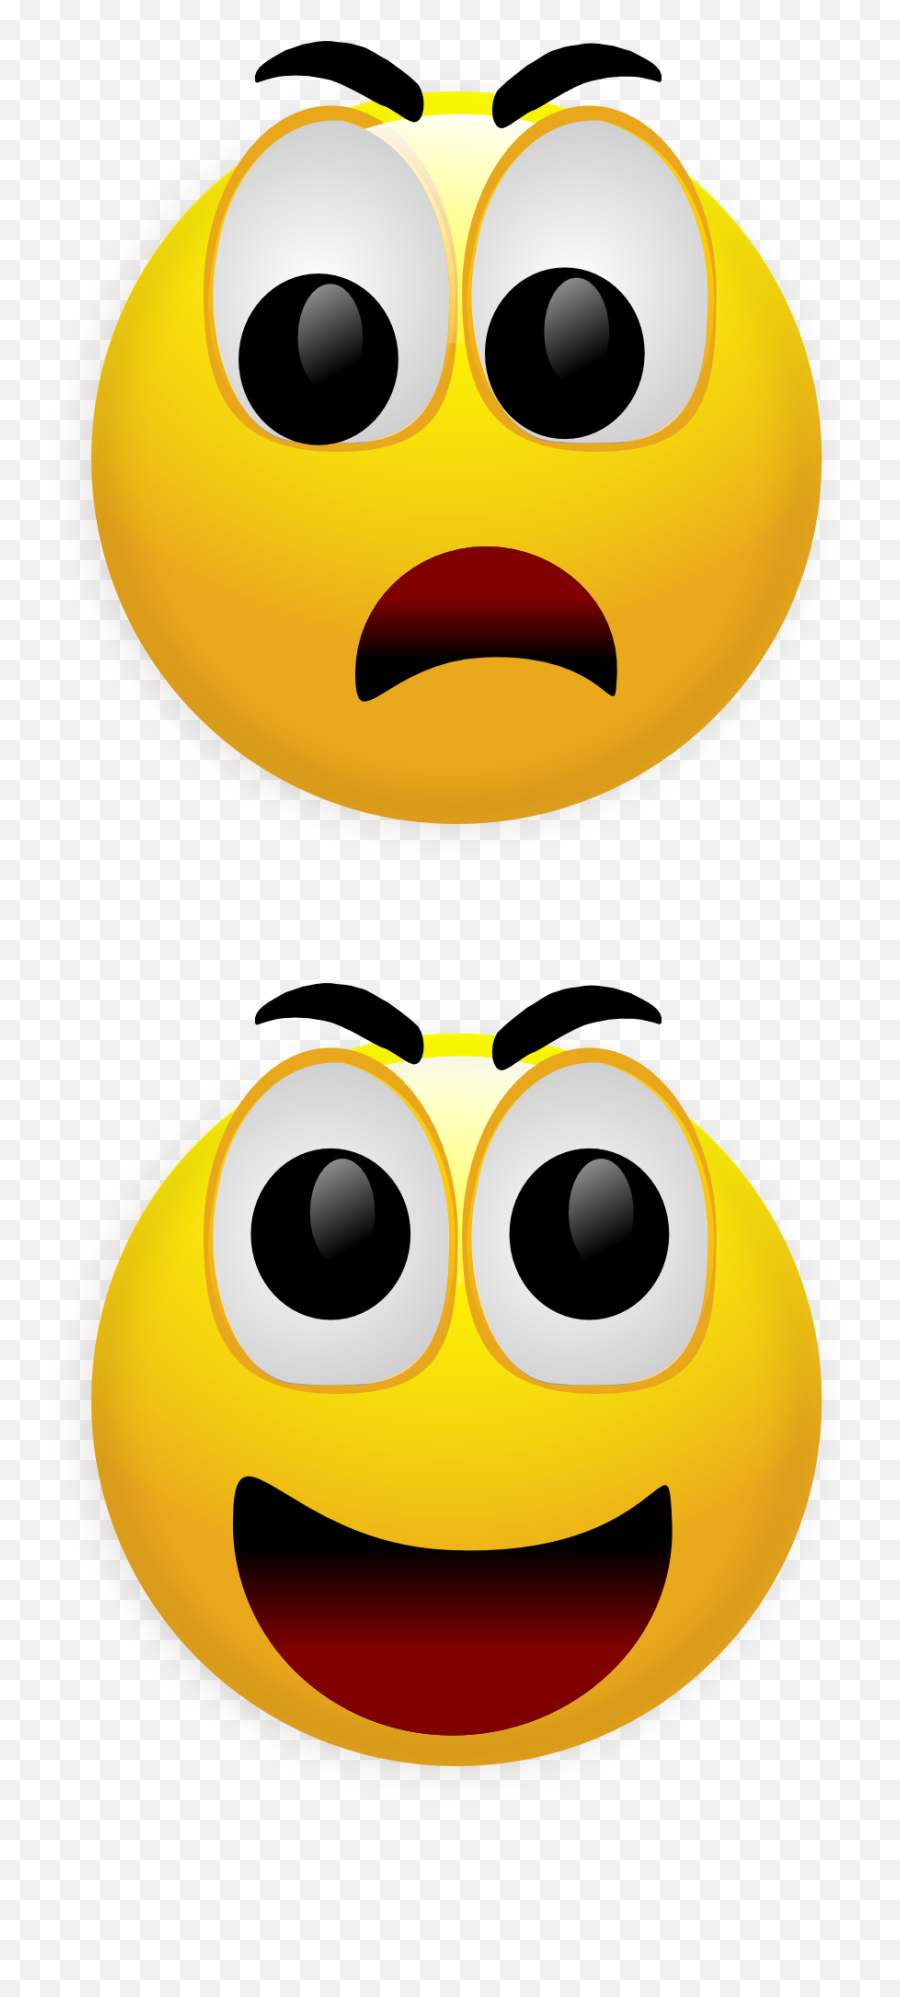 Smiley Fear Anger Angry Scared - Clipart Of Scared Faces Emoji,Angry Face Emoticons